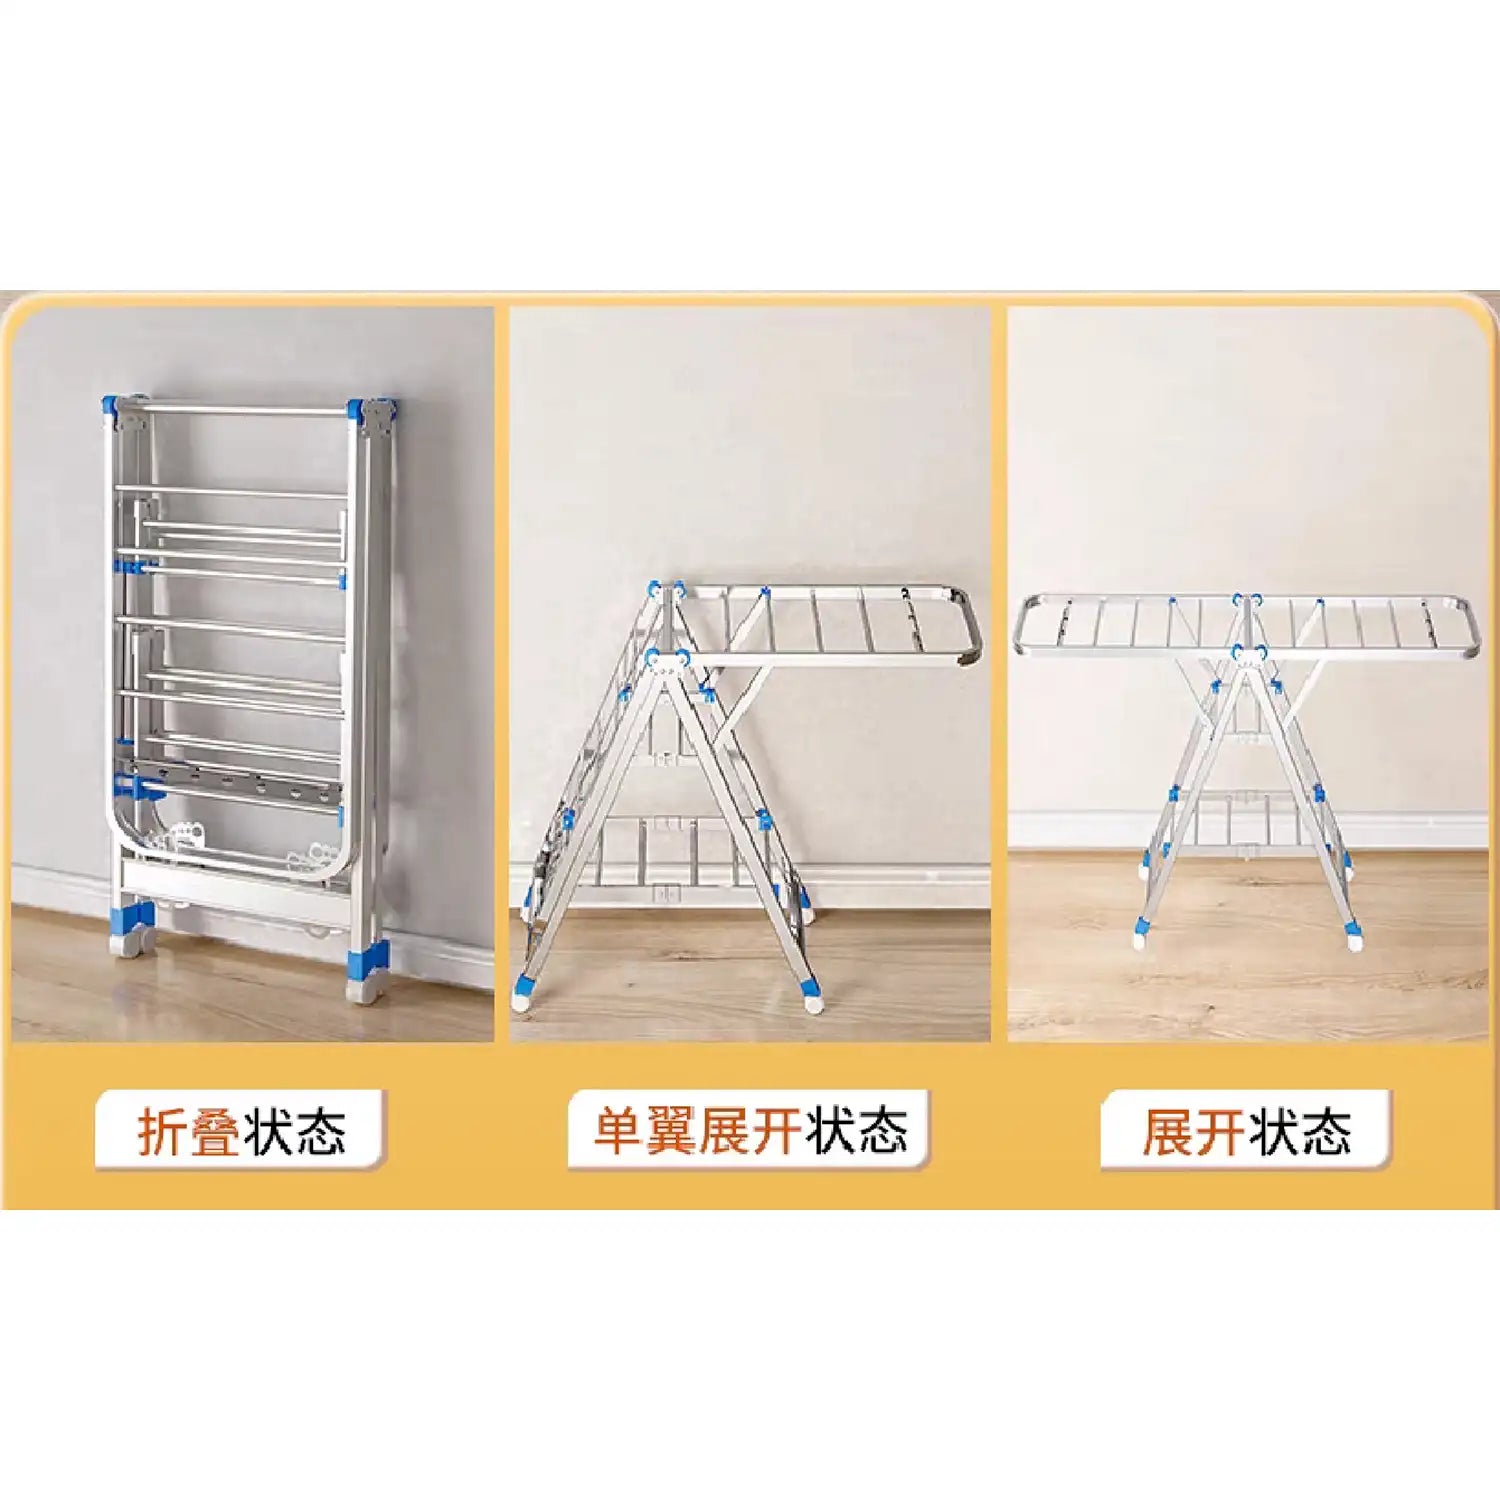 Enhanced Foldable Stainless Steel Clothes Hanger Rack - Space-Saving, Durable, Organize, Sturdy